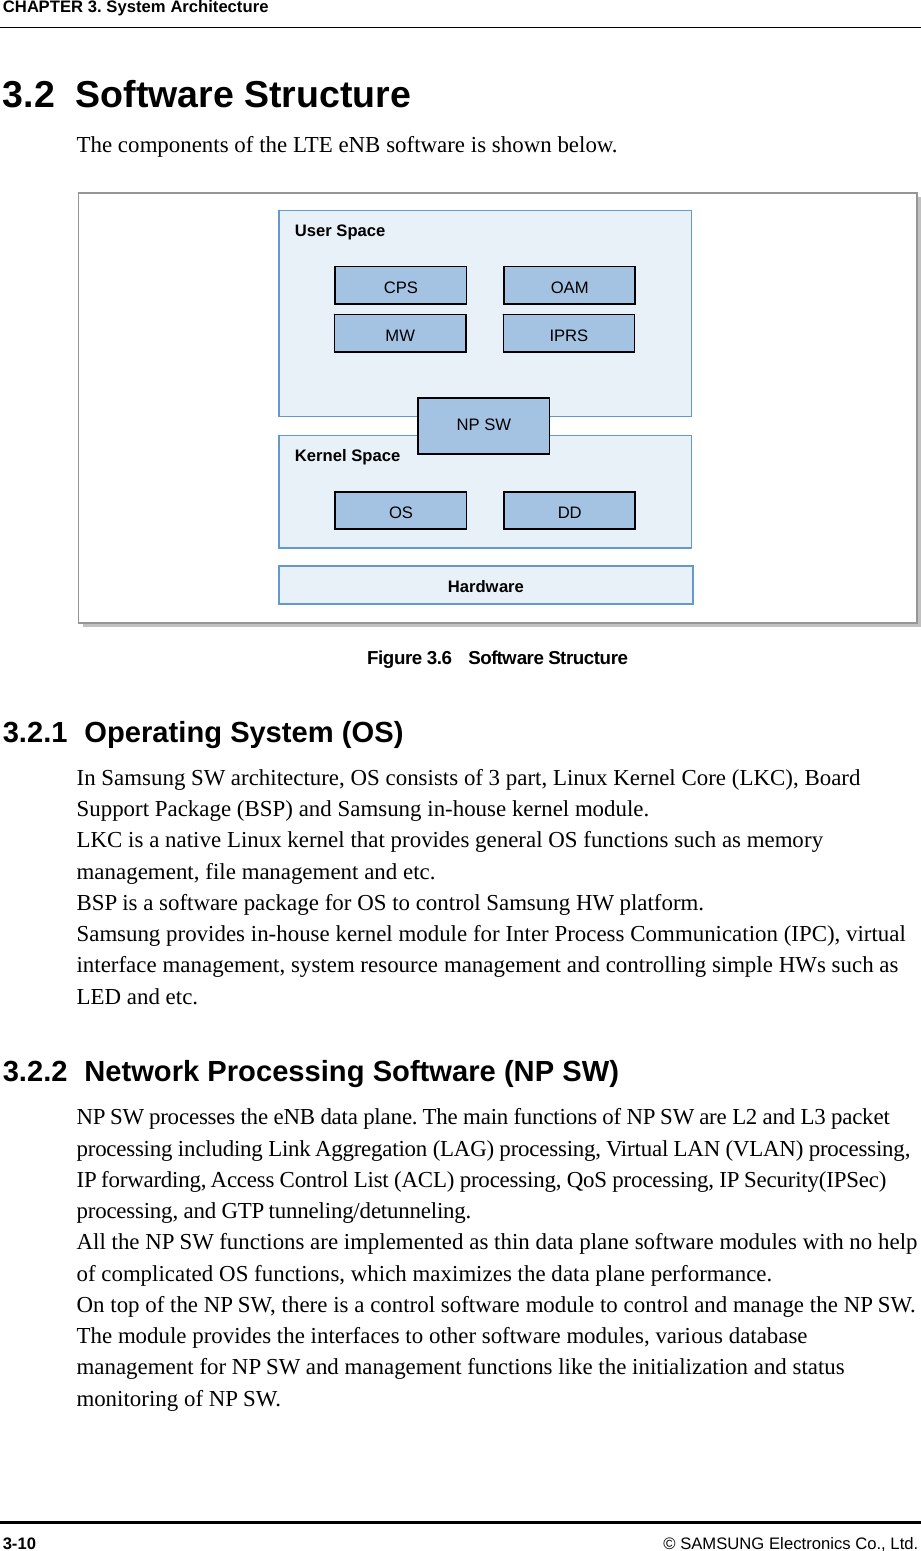 CHAPTER 3. System Architecture 3-10  © SAMSUNG Electronics Co., Ltd. 3.2 Software Structure The components of the LTE eNB software is shown below.  Figure 3.6    Software Structure  3.2.1  Operating System (OS) In Samsung SW architecture, OS consists of 3 part, Linux Kernel Core (LKC), Board Support Package (BSP) and Samsung in-house kernel module. LKC is a native Linux kernel that provides general OS functions such as memory management, file management and etc. BSP is a software package for OS to control Samsung HW platform. Samsung provides in-house kernel module for Inter Process Communication (IPC), virtual interface management, system resource management and controlling simple HWs such as LED and etc.  3.2.2  Network Processing Software (NP SW) NP SW processes the eNB data plane. The main functions of NP SW are L2 and L3 packet processing including Link Aggregation (LAG) processing, Virtual LAN (VLAN) processing, IP forwarding, Access Control List (ACL) processing, QoS processing, IP Security(IPSec) processing, and GTP tunneling/detunneling. All the NP SW functions are implemented as thin data plane software modules with no help of complicated OS functions, which maximizes the data plane performance. On top of the NP SW, there is a control software module to control and manage the NP SW. The module provides the interfaces to other software modules, various database management for NP SW and management functions like the initialization and status monitoring of NP SW. User Space CPS OAMMW IPRSKernel Space OS DDHardwareNP SW 